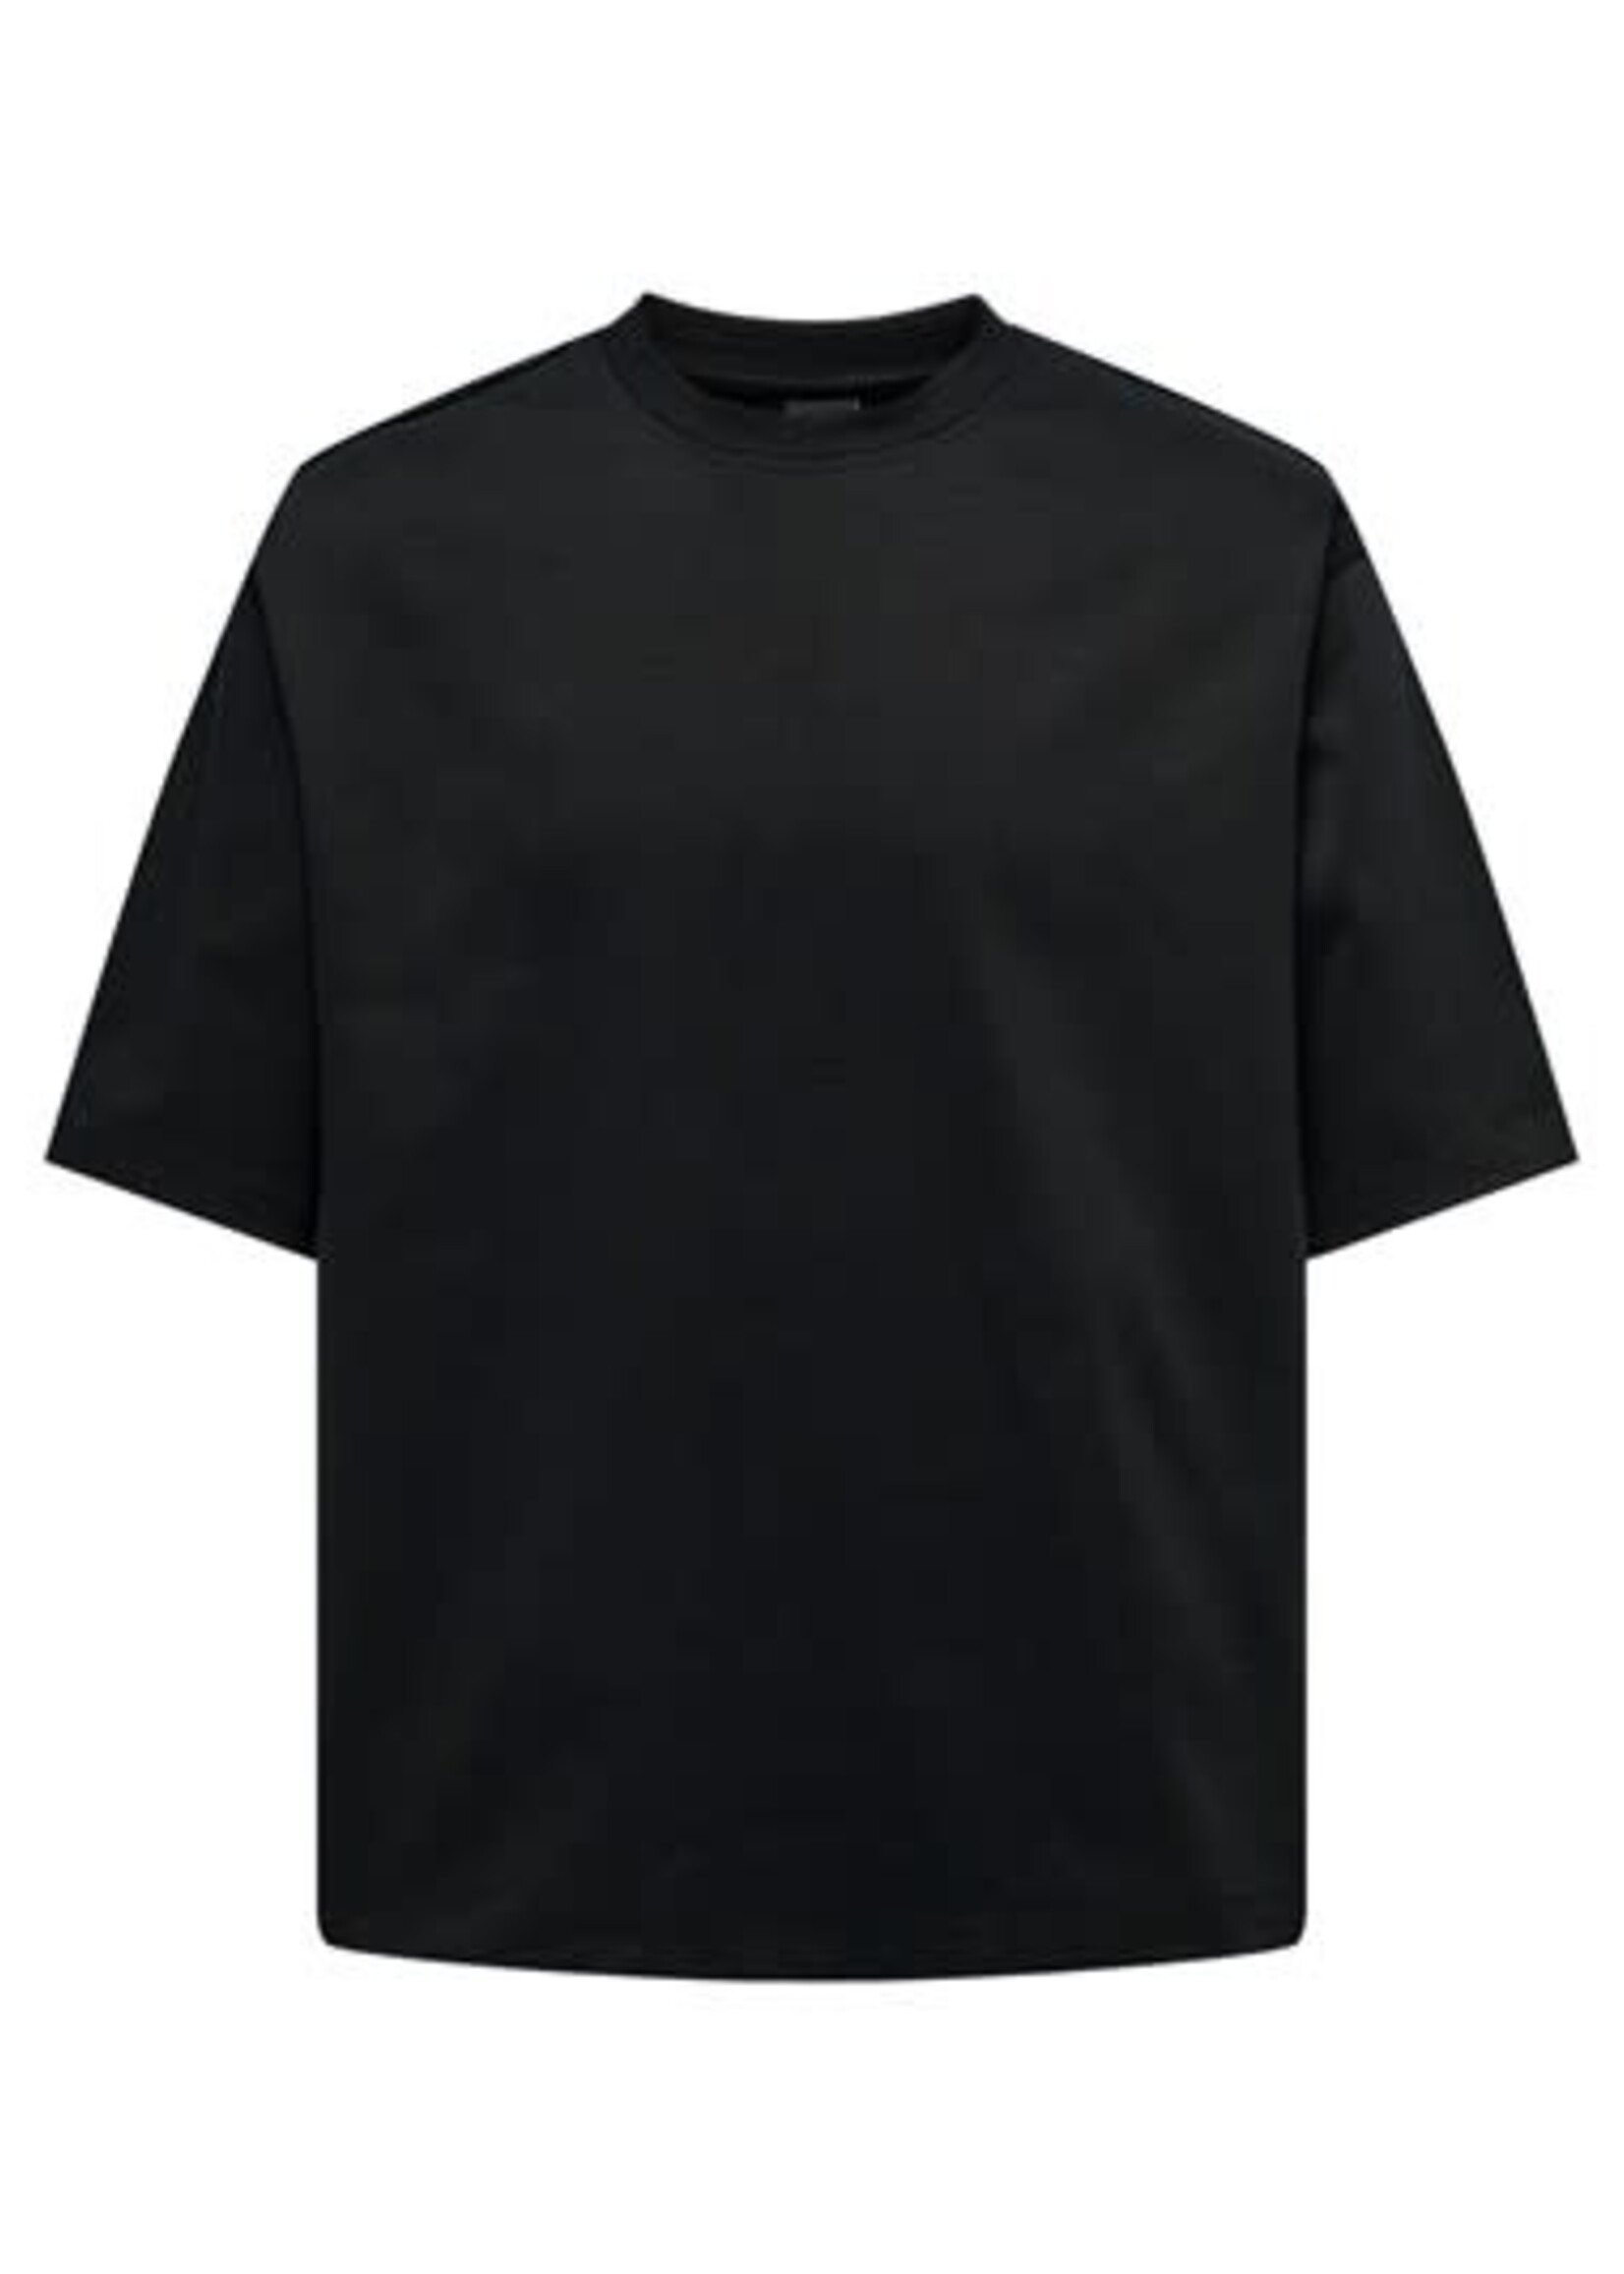 Only & Sons Millenium Oversized Tee Black